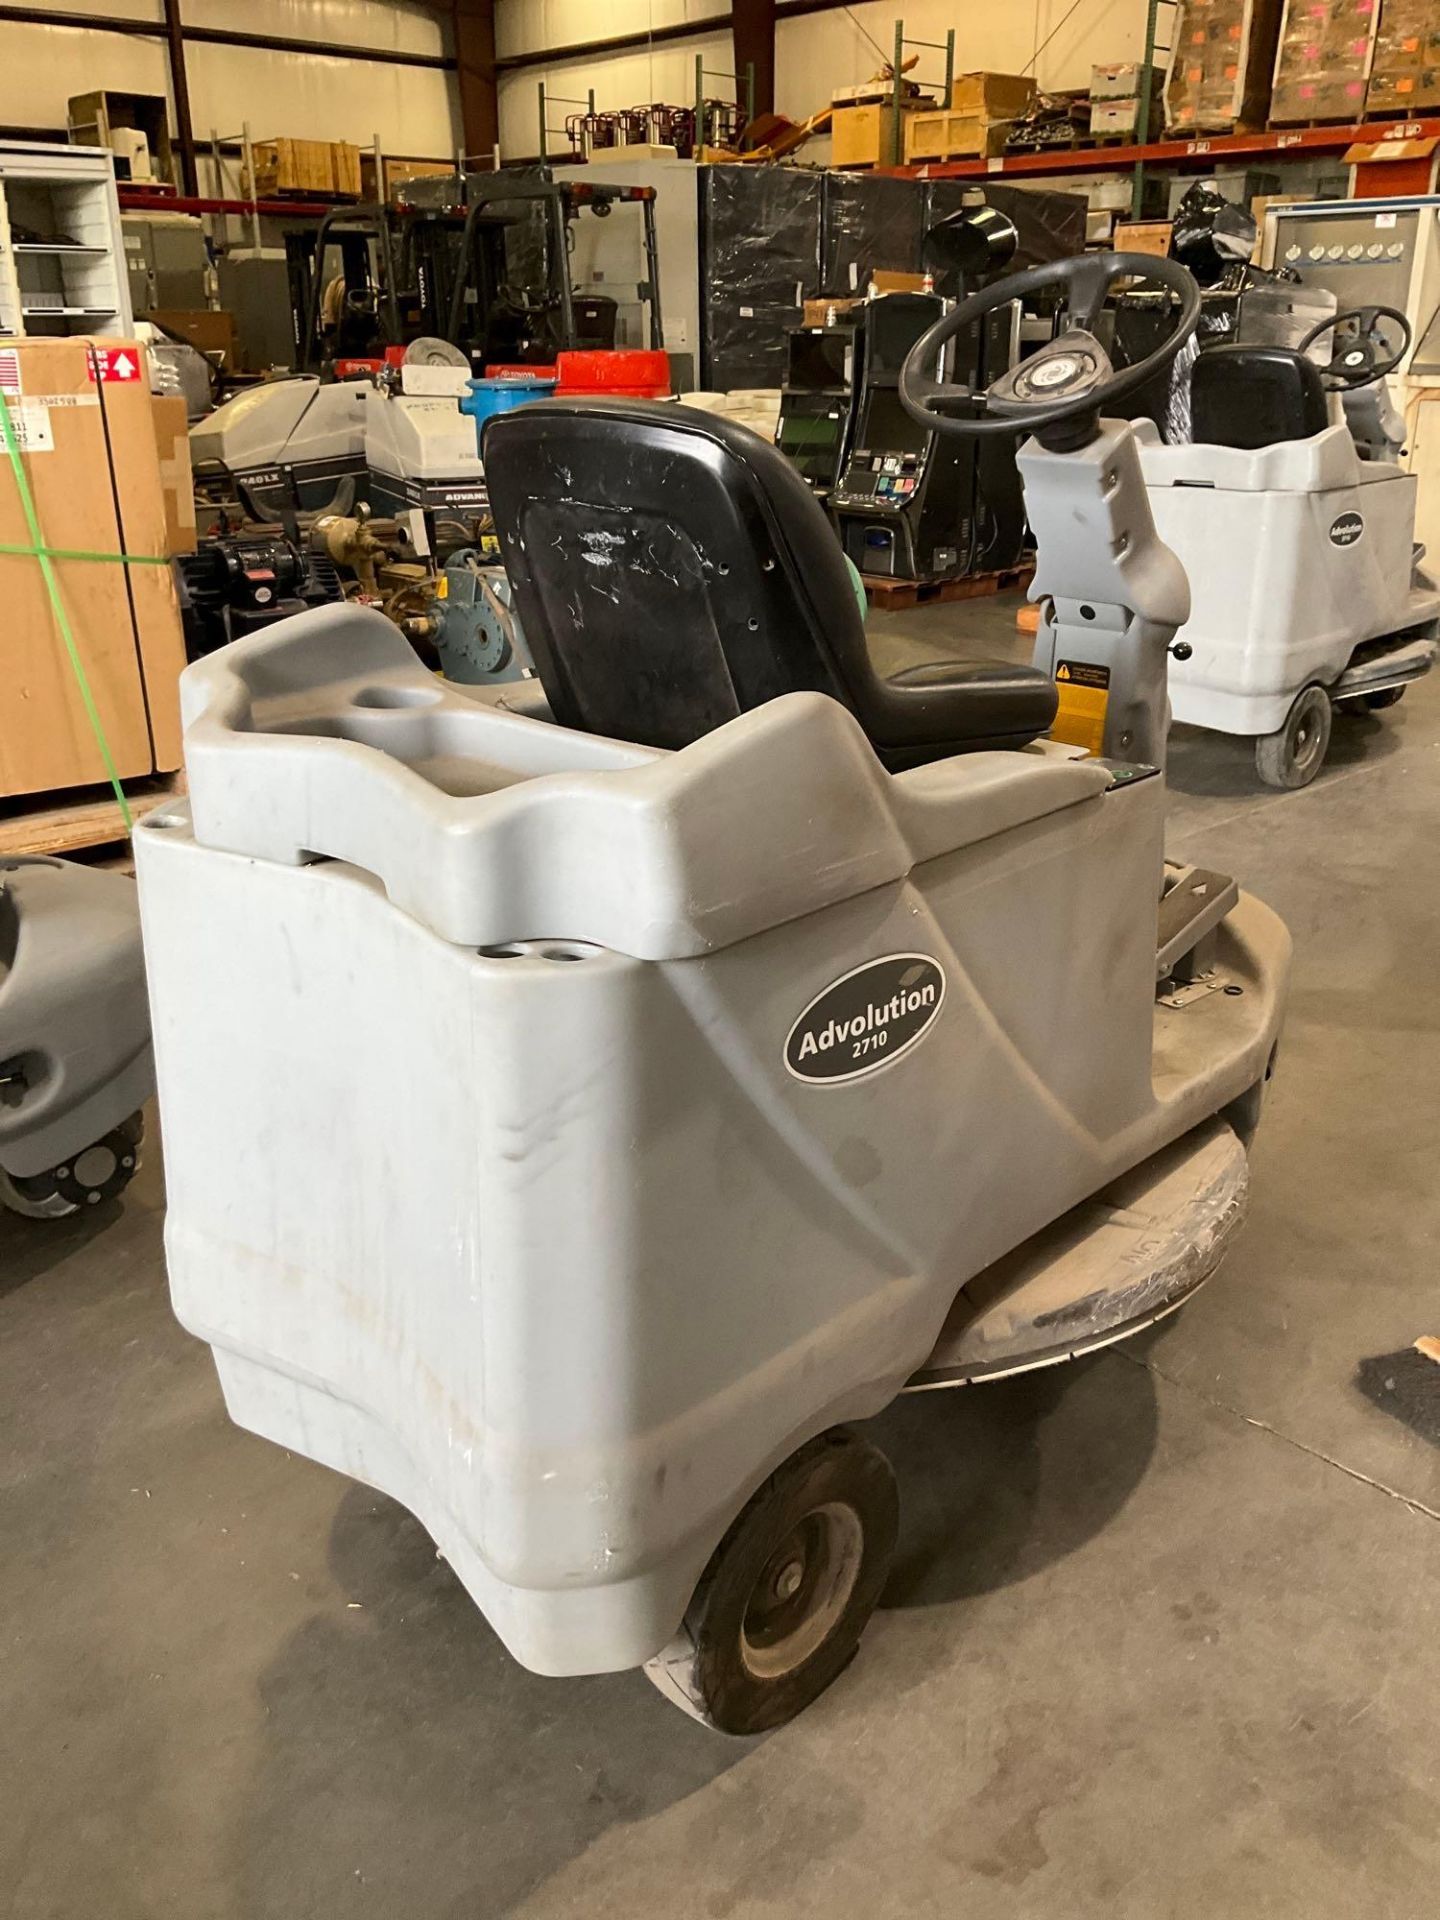 NILFISK ADVANCE RIDE ON FLOOR BURNISHER MODEL ADVOLUTION 2710, ELECTRIC, 36 VOLTS, ONE NEW BATTERY, - Image 5 of 14